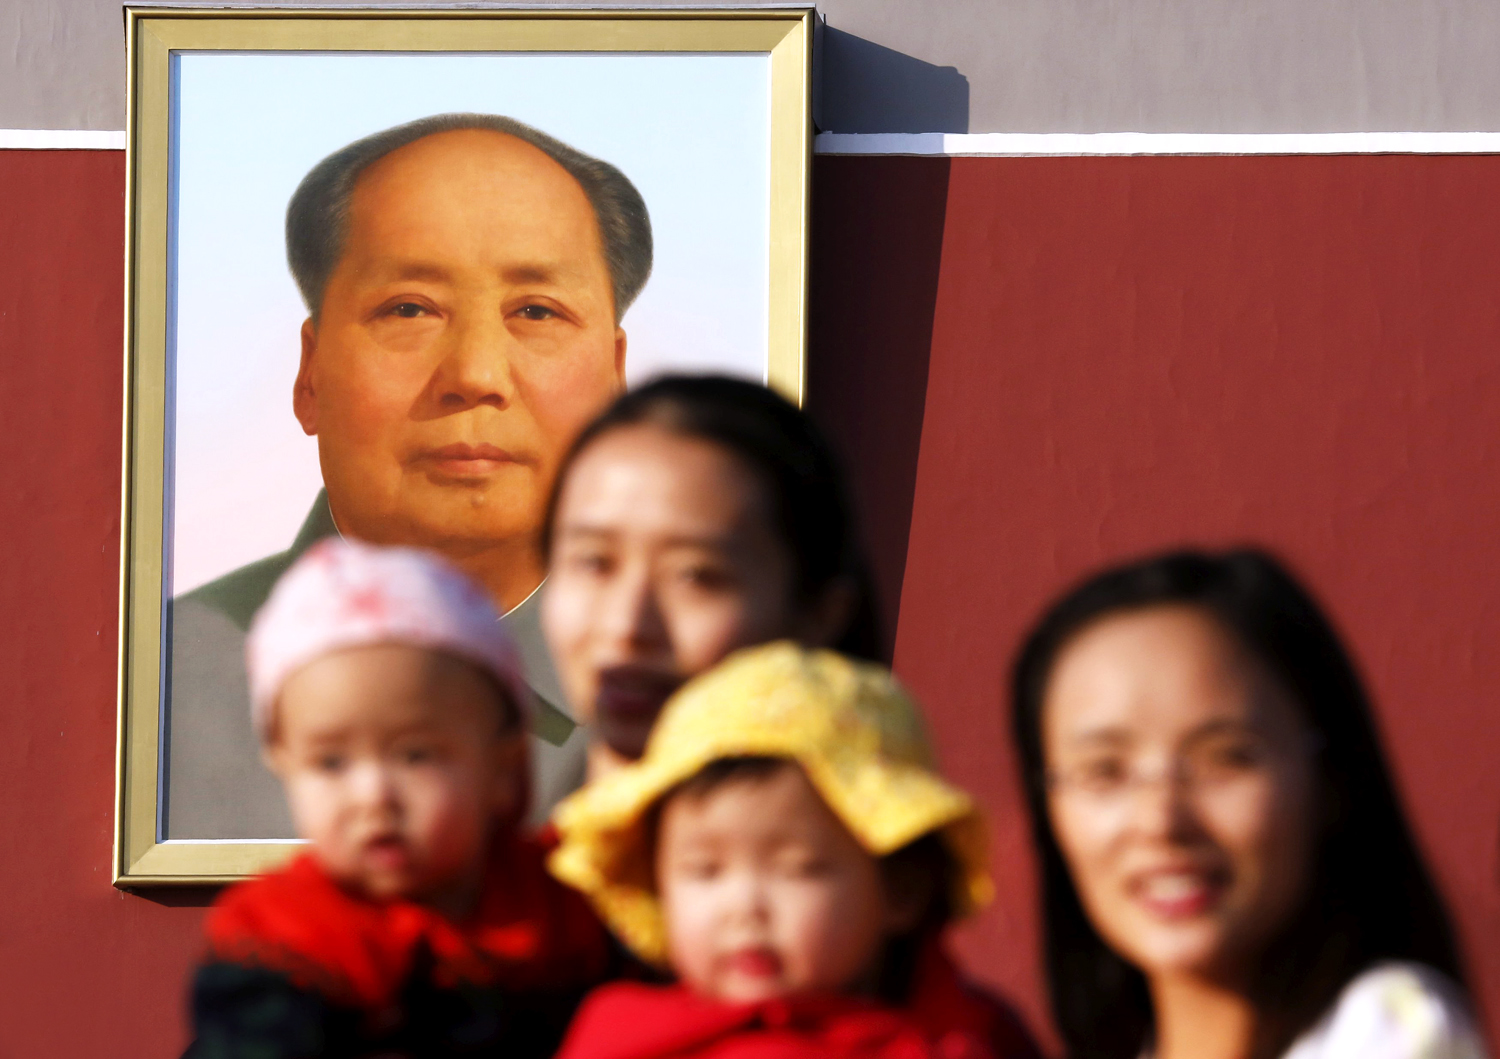 Two women and their babies pose for photographs in front of the giant portrait of late Chinese chairman Mao Zedong at the Tiananmen Gate in Beijing. Photo: Reuters